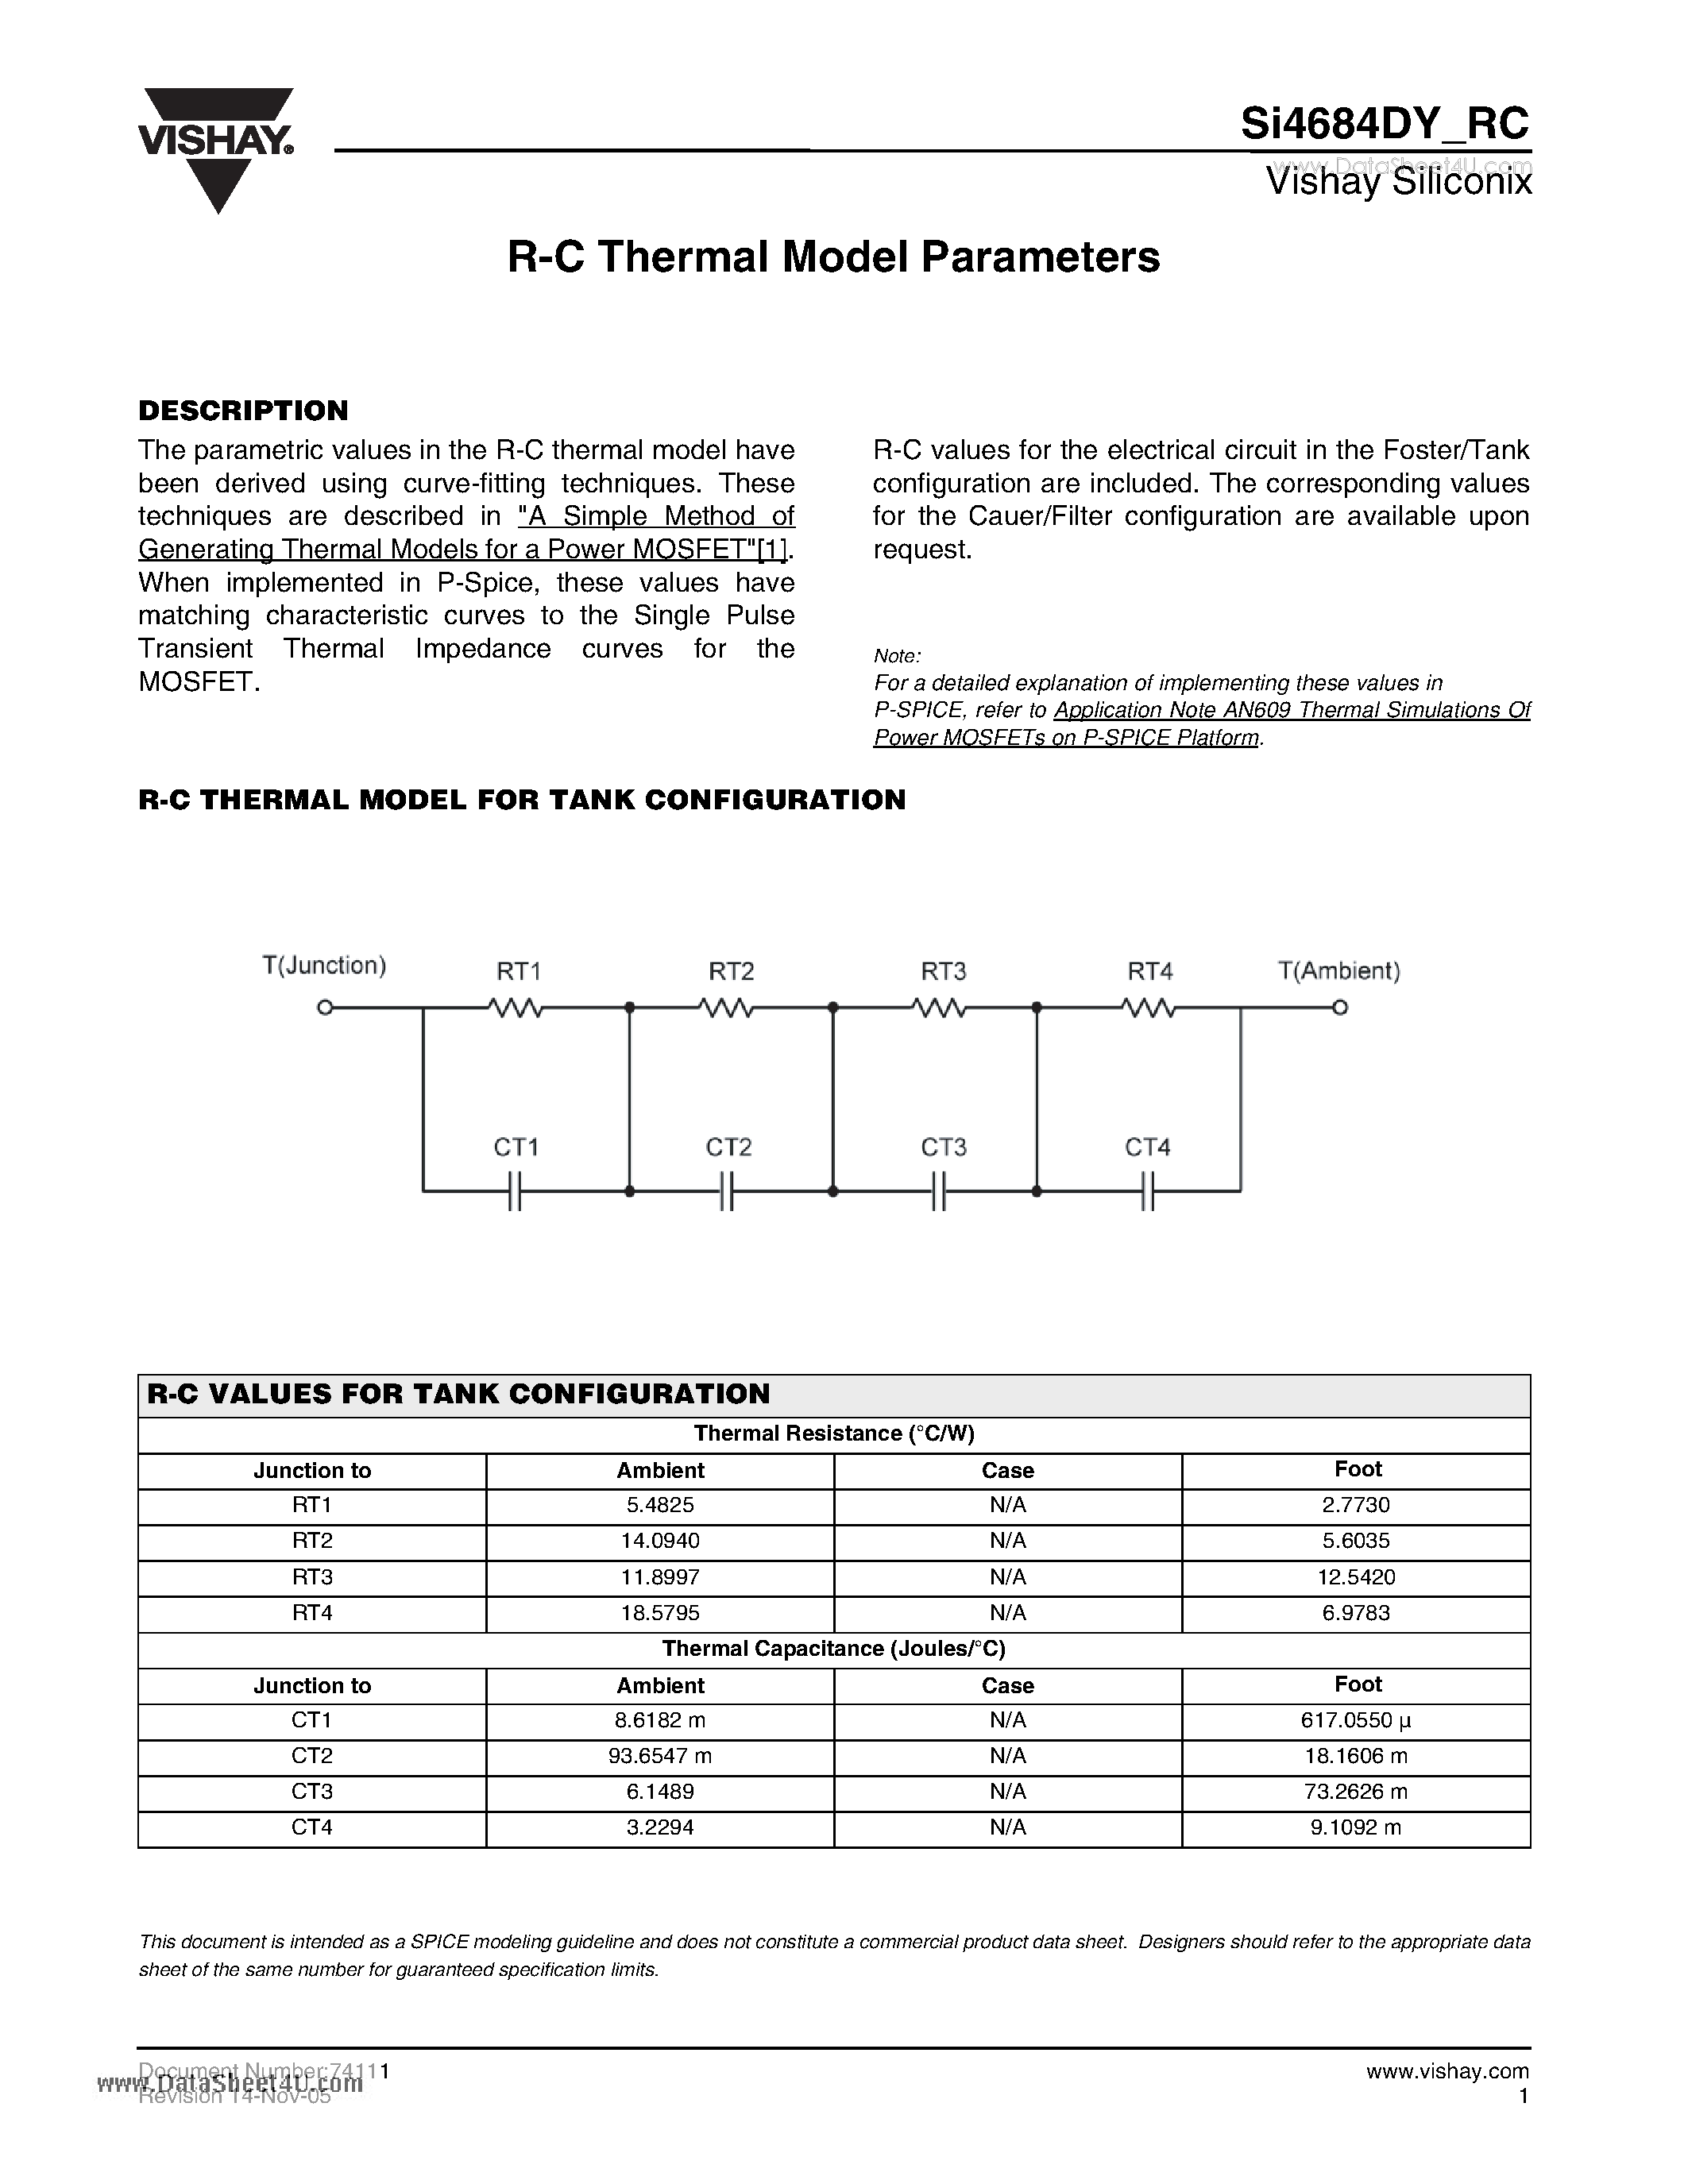 Datasheet SI4684DY_RC - R-C Thermal Model Parameters page 1